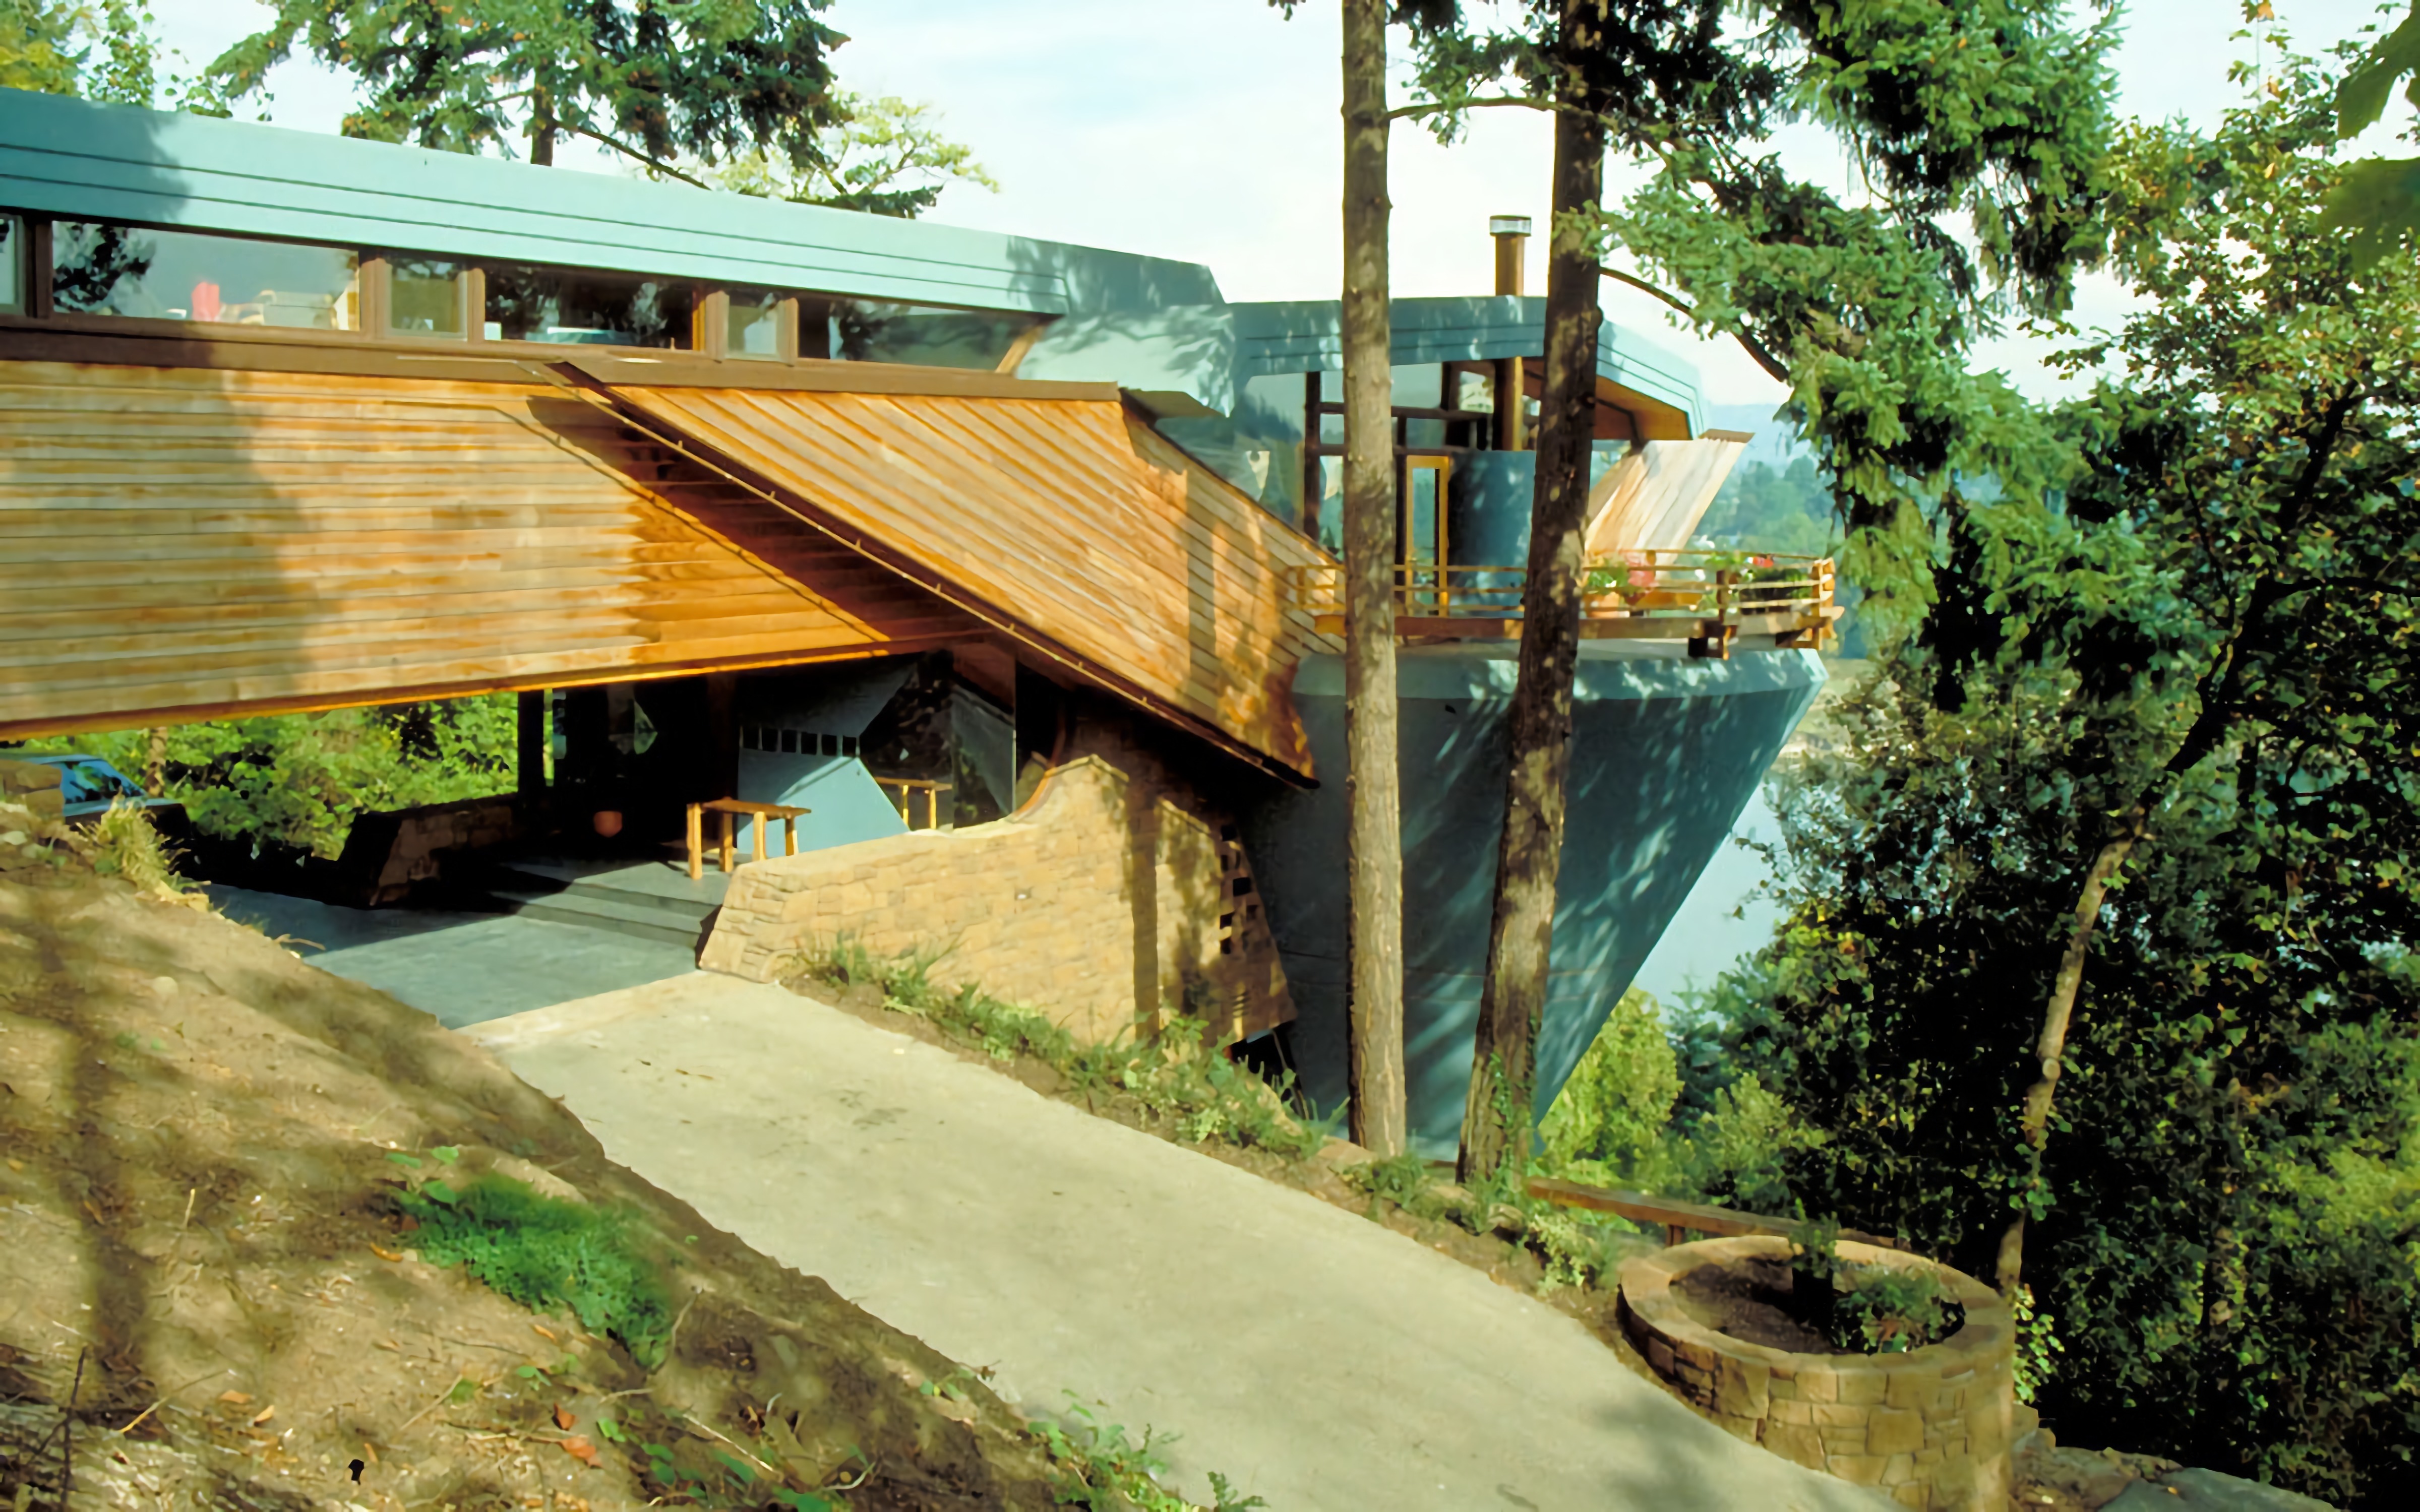 It's Not Impossible For Robert Harvey Oshatz to Build a Dwelling on a Slope with a 30-degree Slope